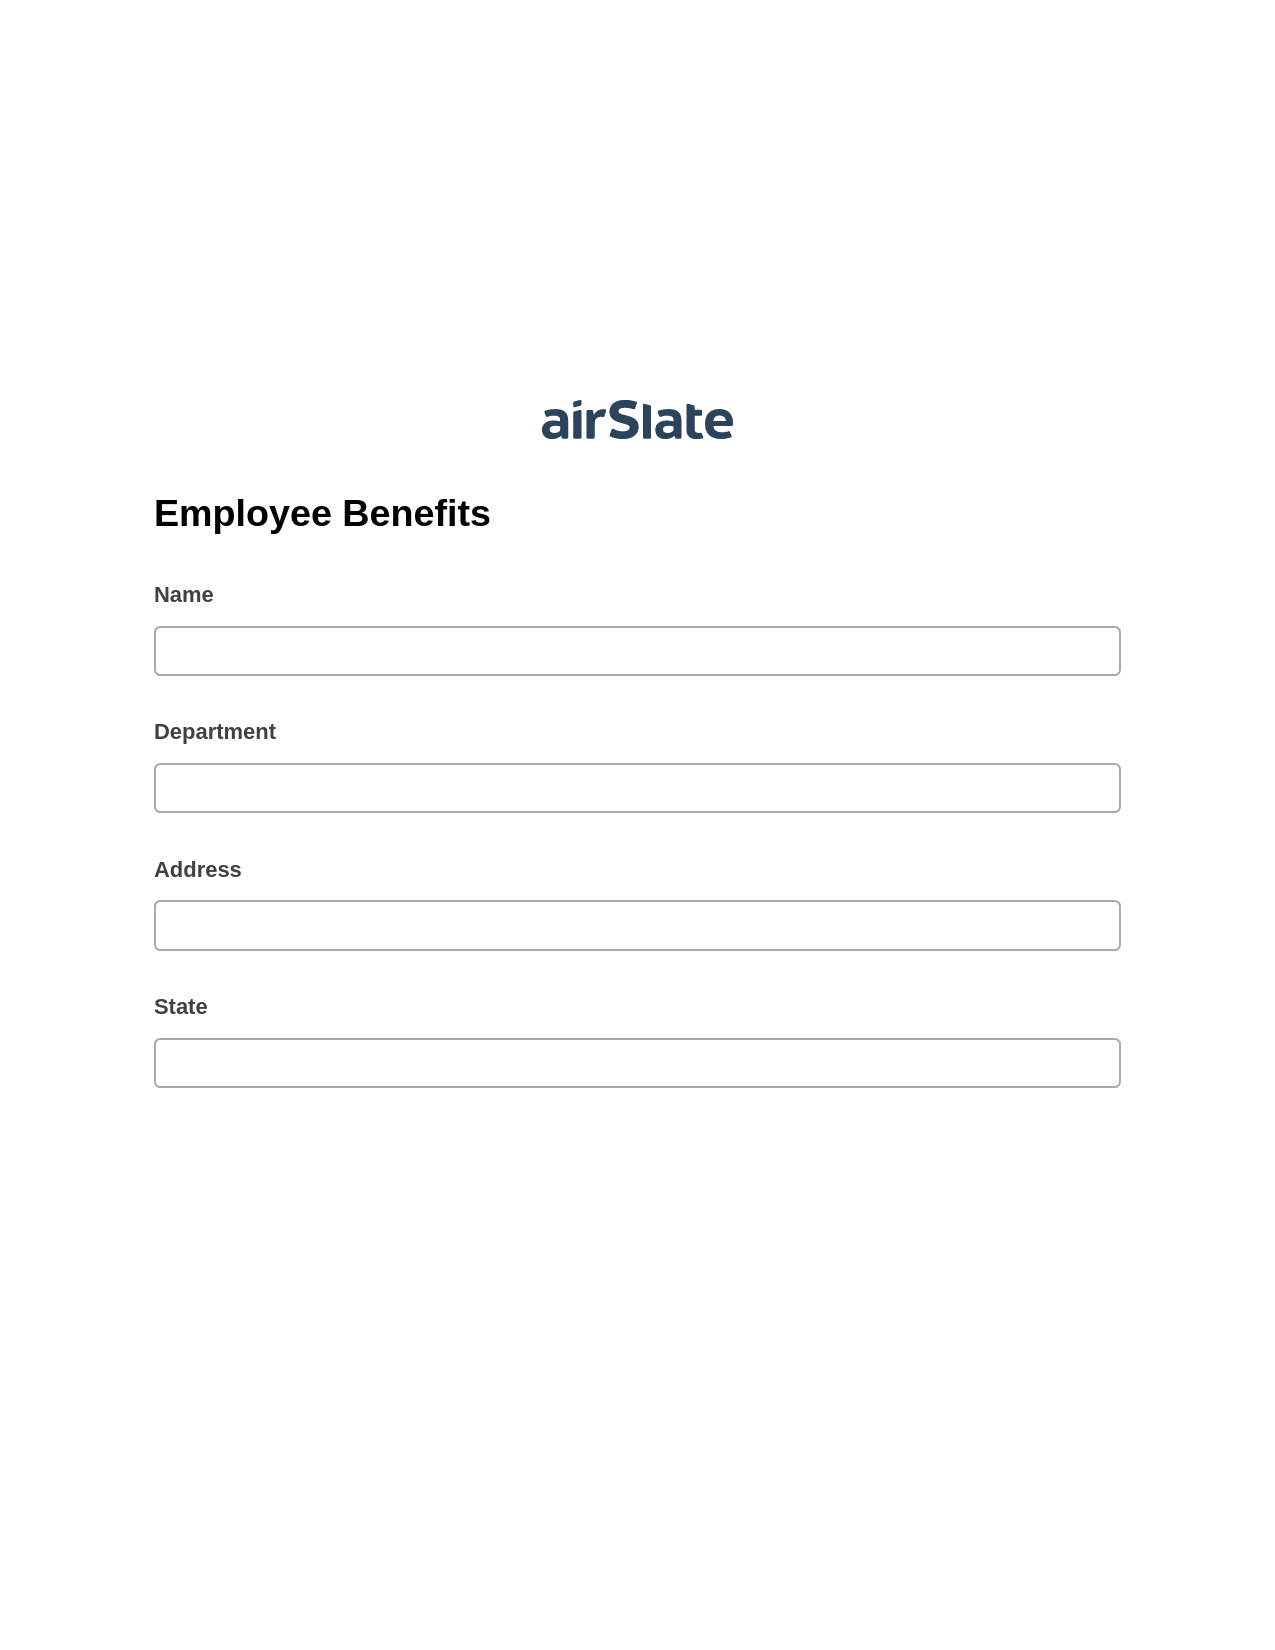 Employee Benefits Pre-fill from MySQL Bot, Create NetSuite Records Bot, Export to Smartsheet